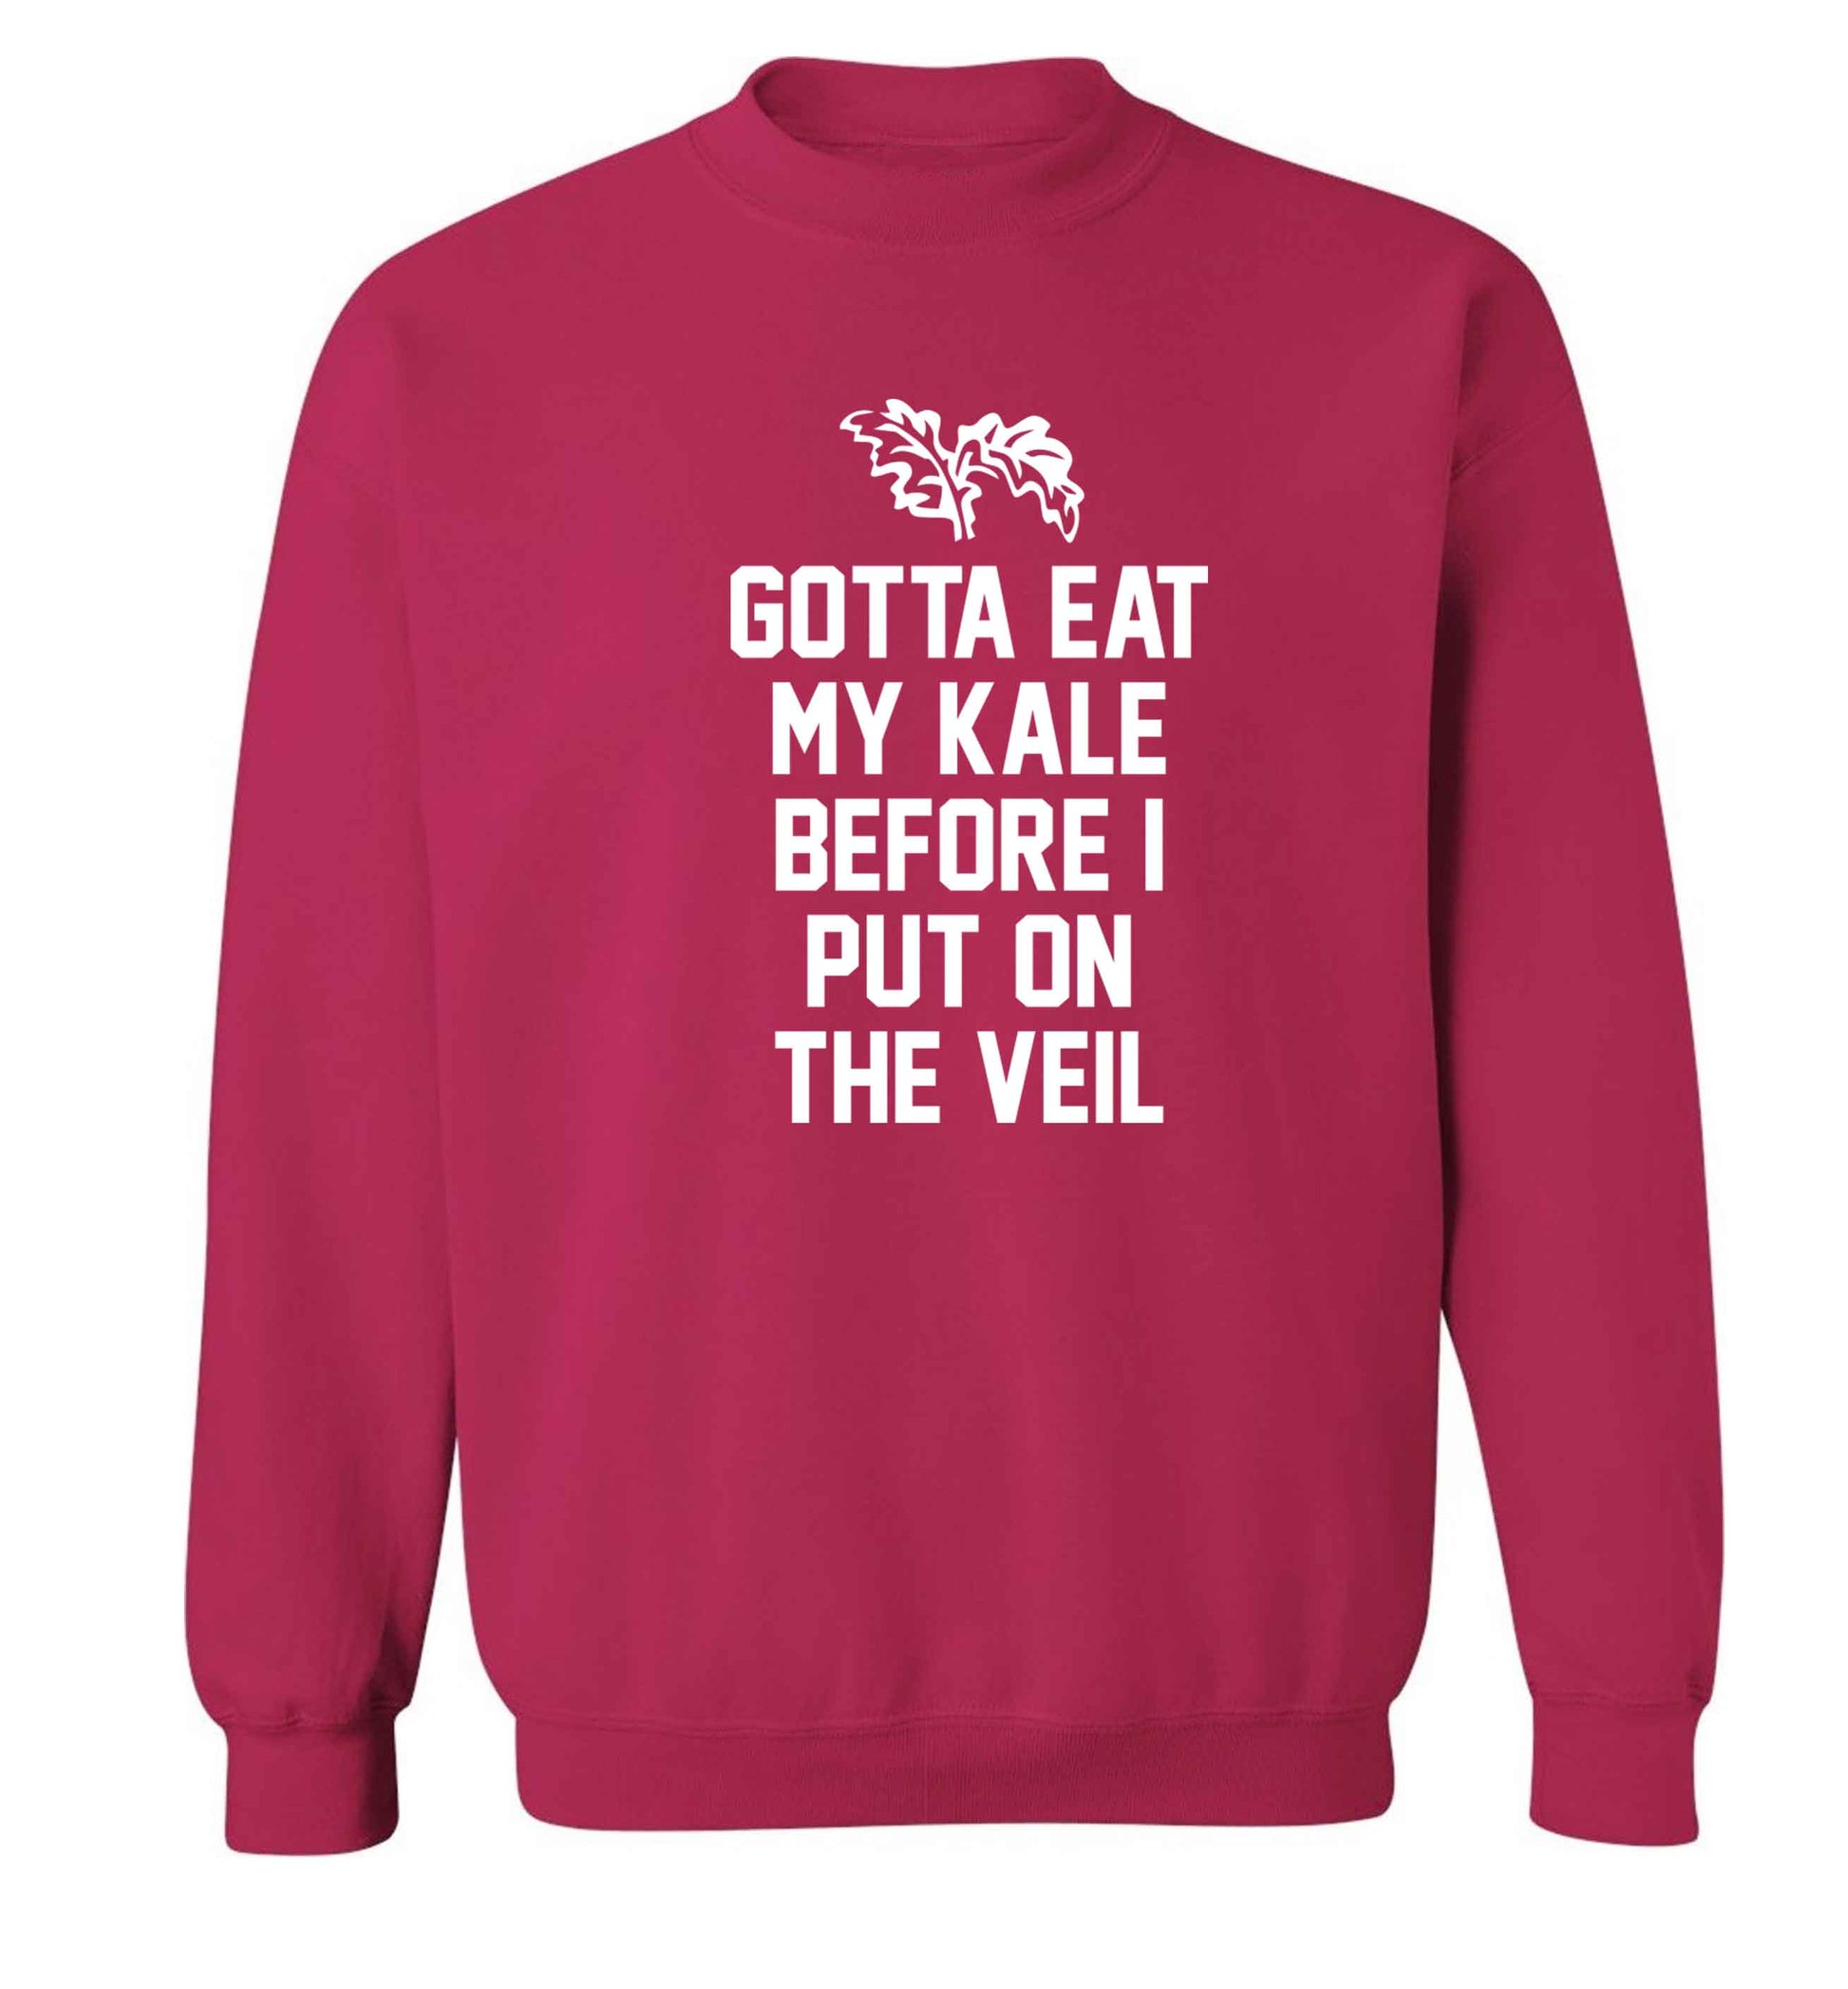 Gotta eat my kale before I put on the veil Adult's unisex pink Sweater 2XL